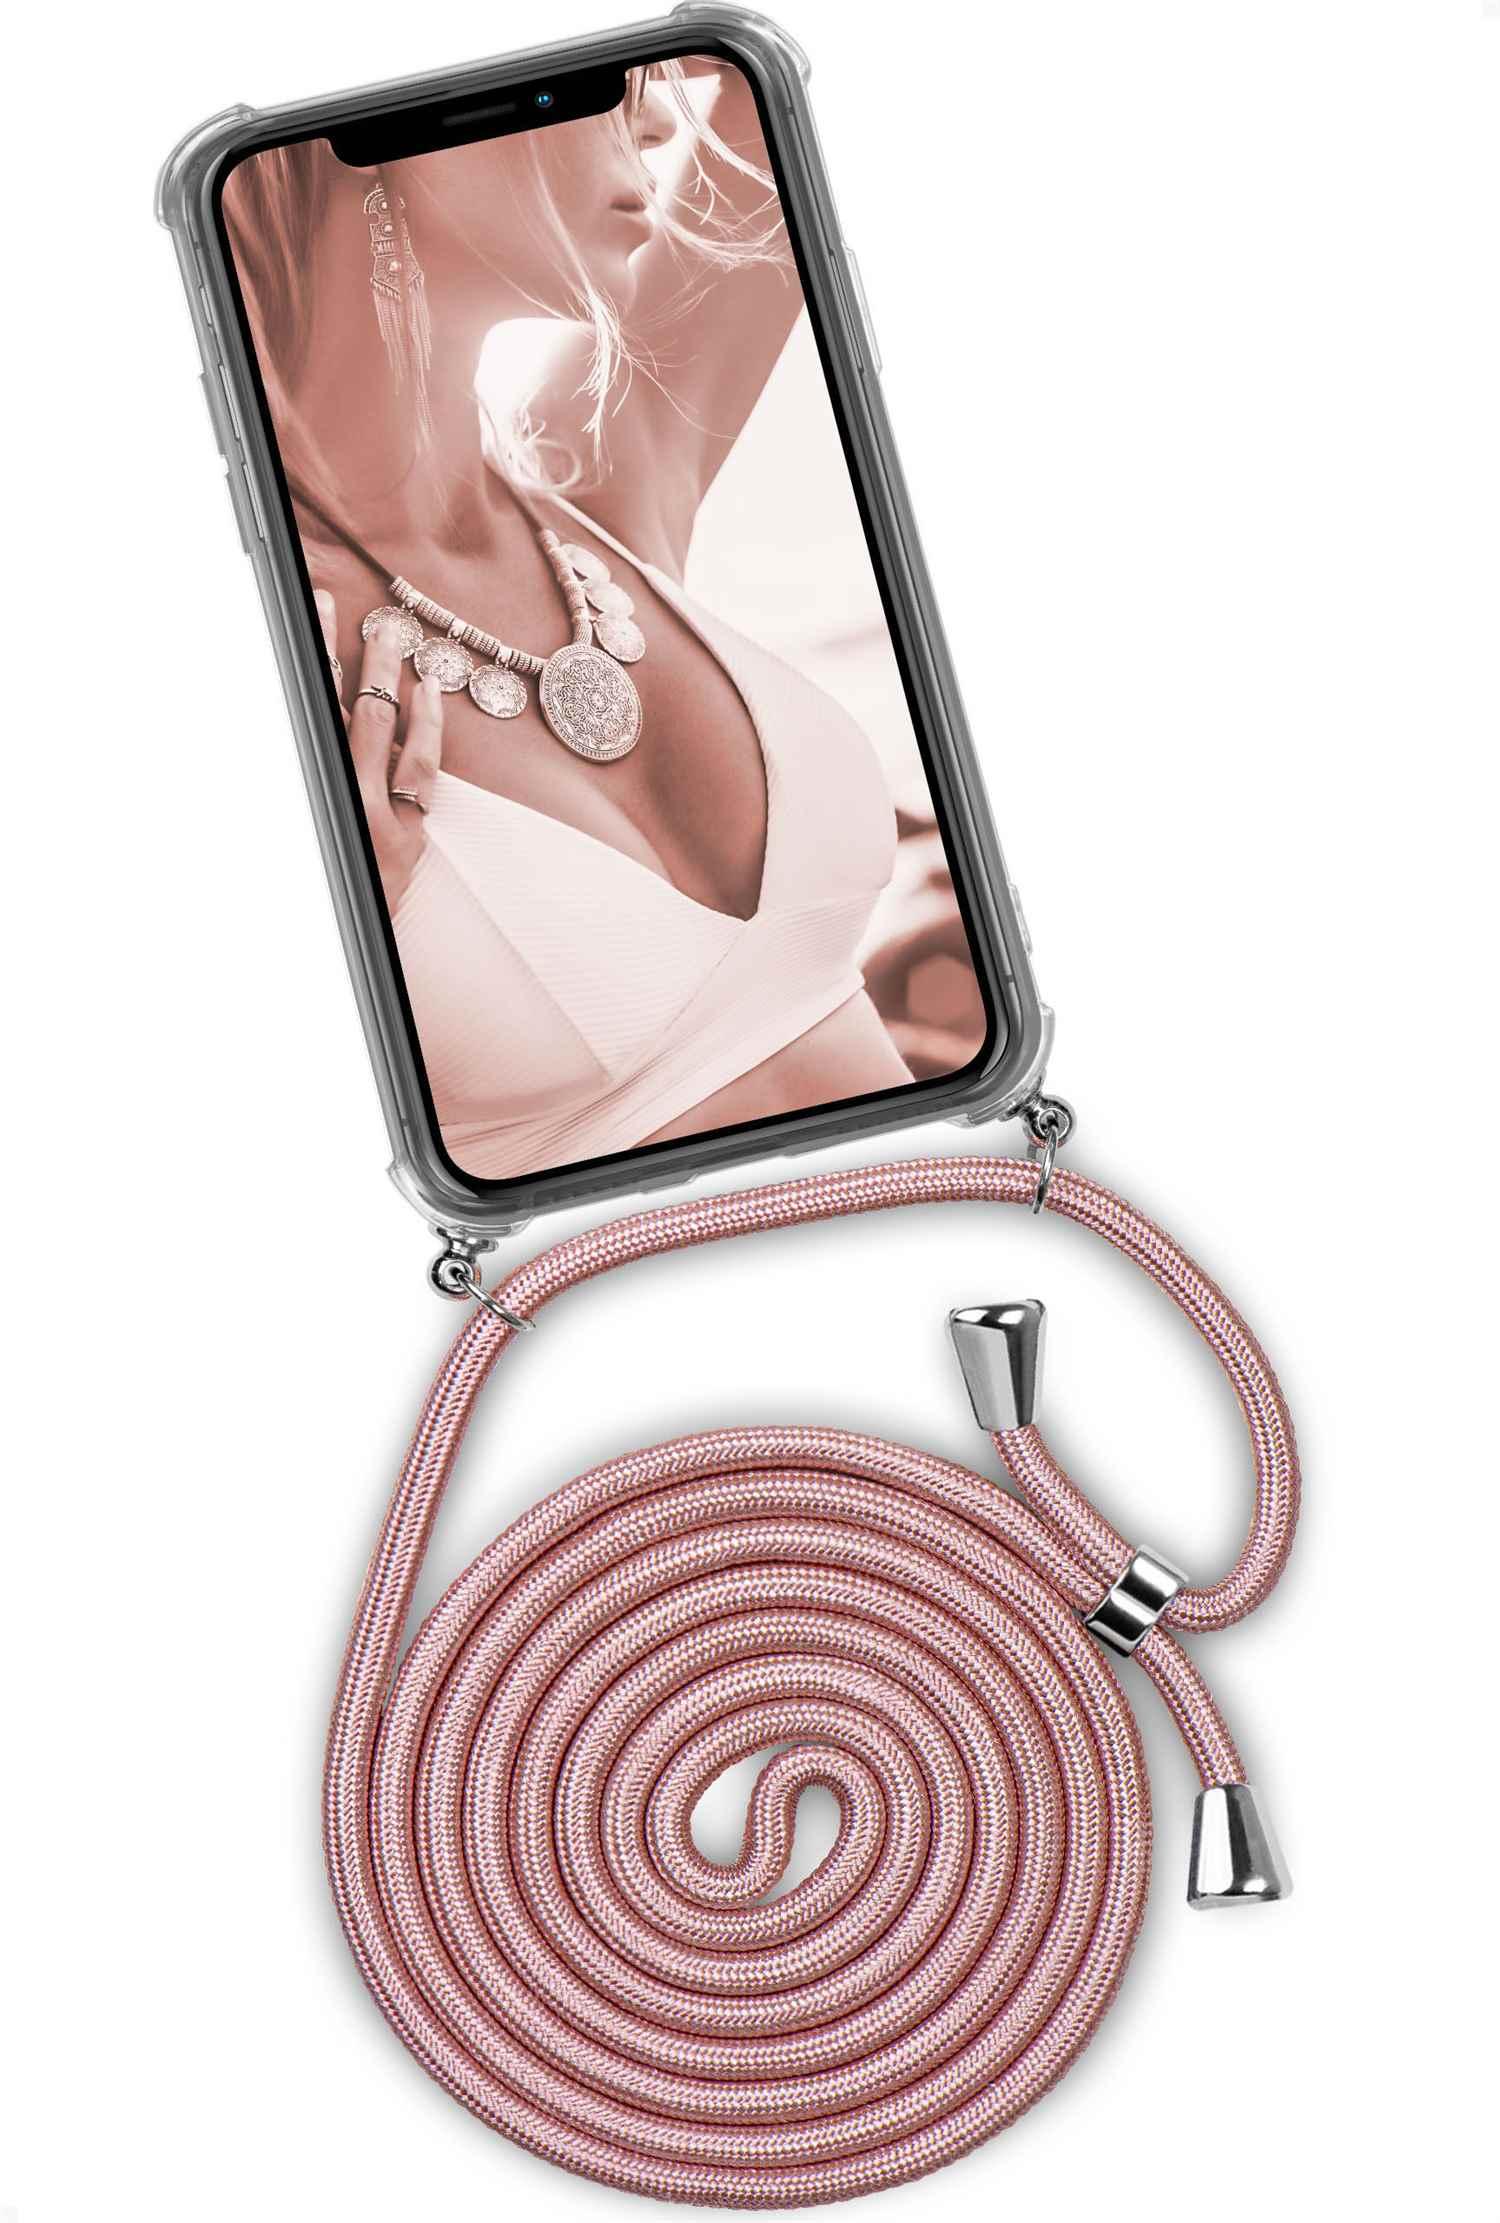 11, iPhone Blush Twist Backcover, ONEFLOW (Silber) Case, Shiny Apple,